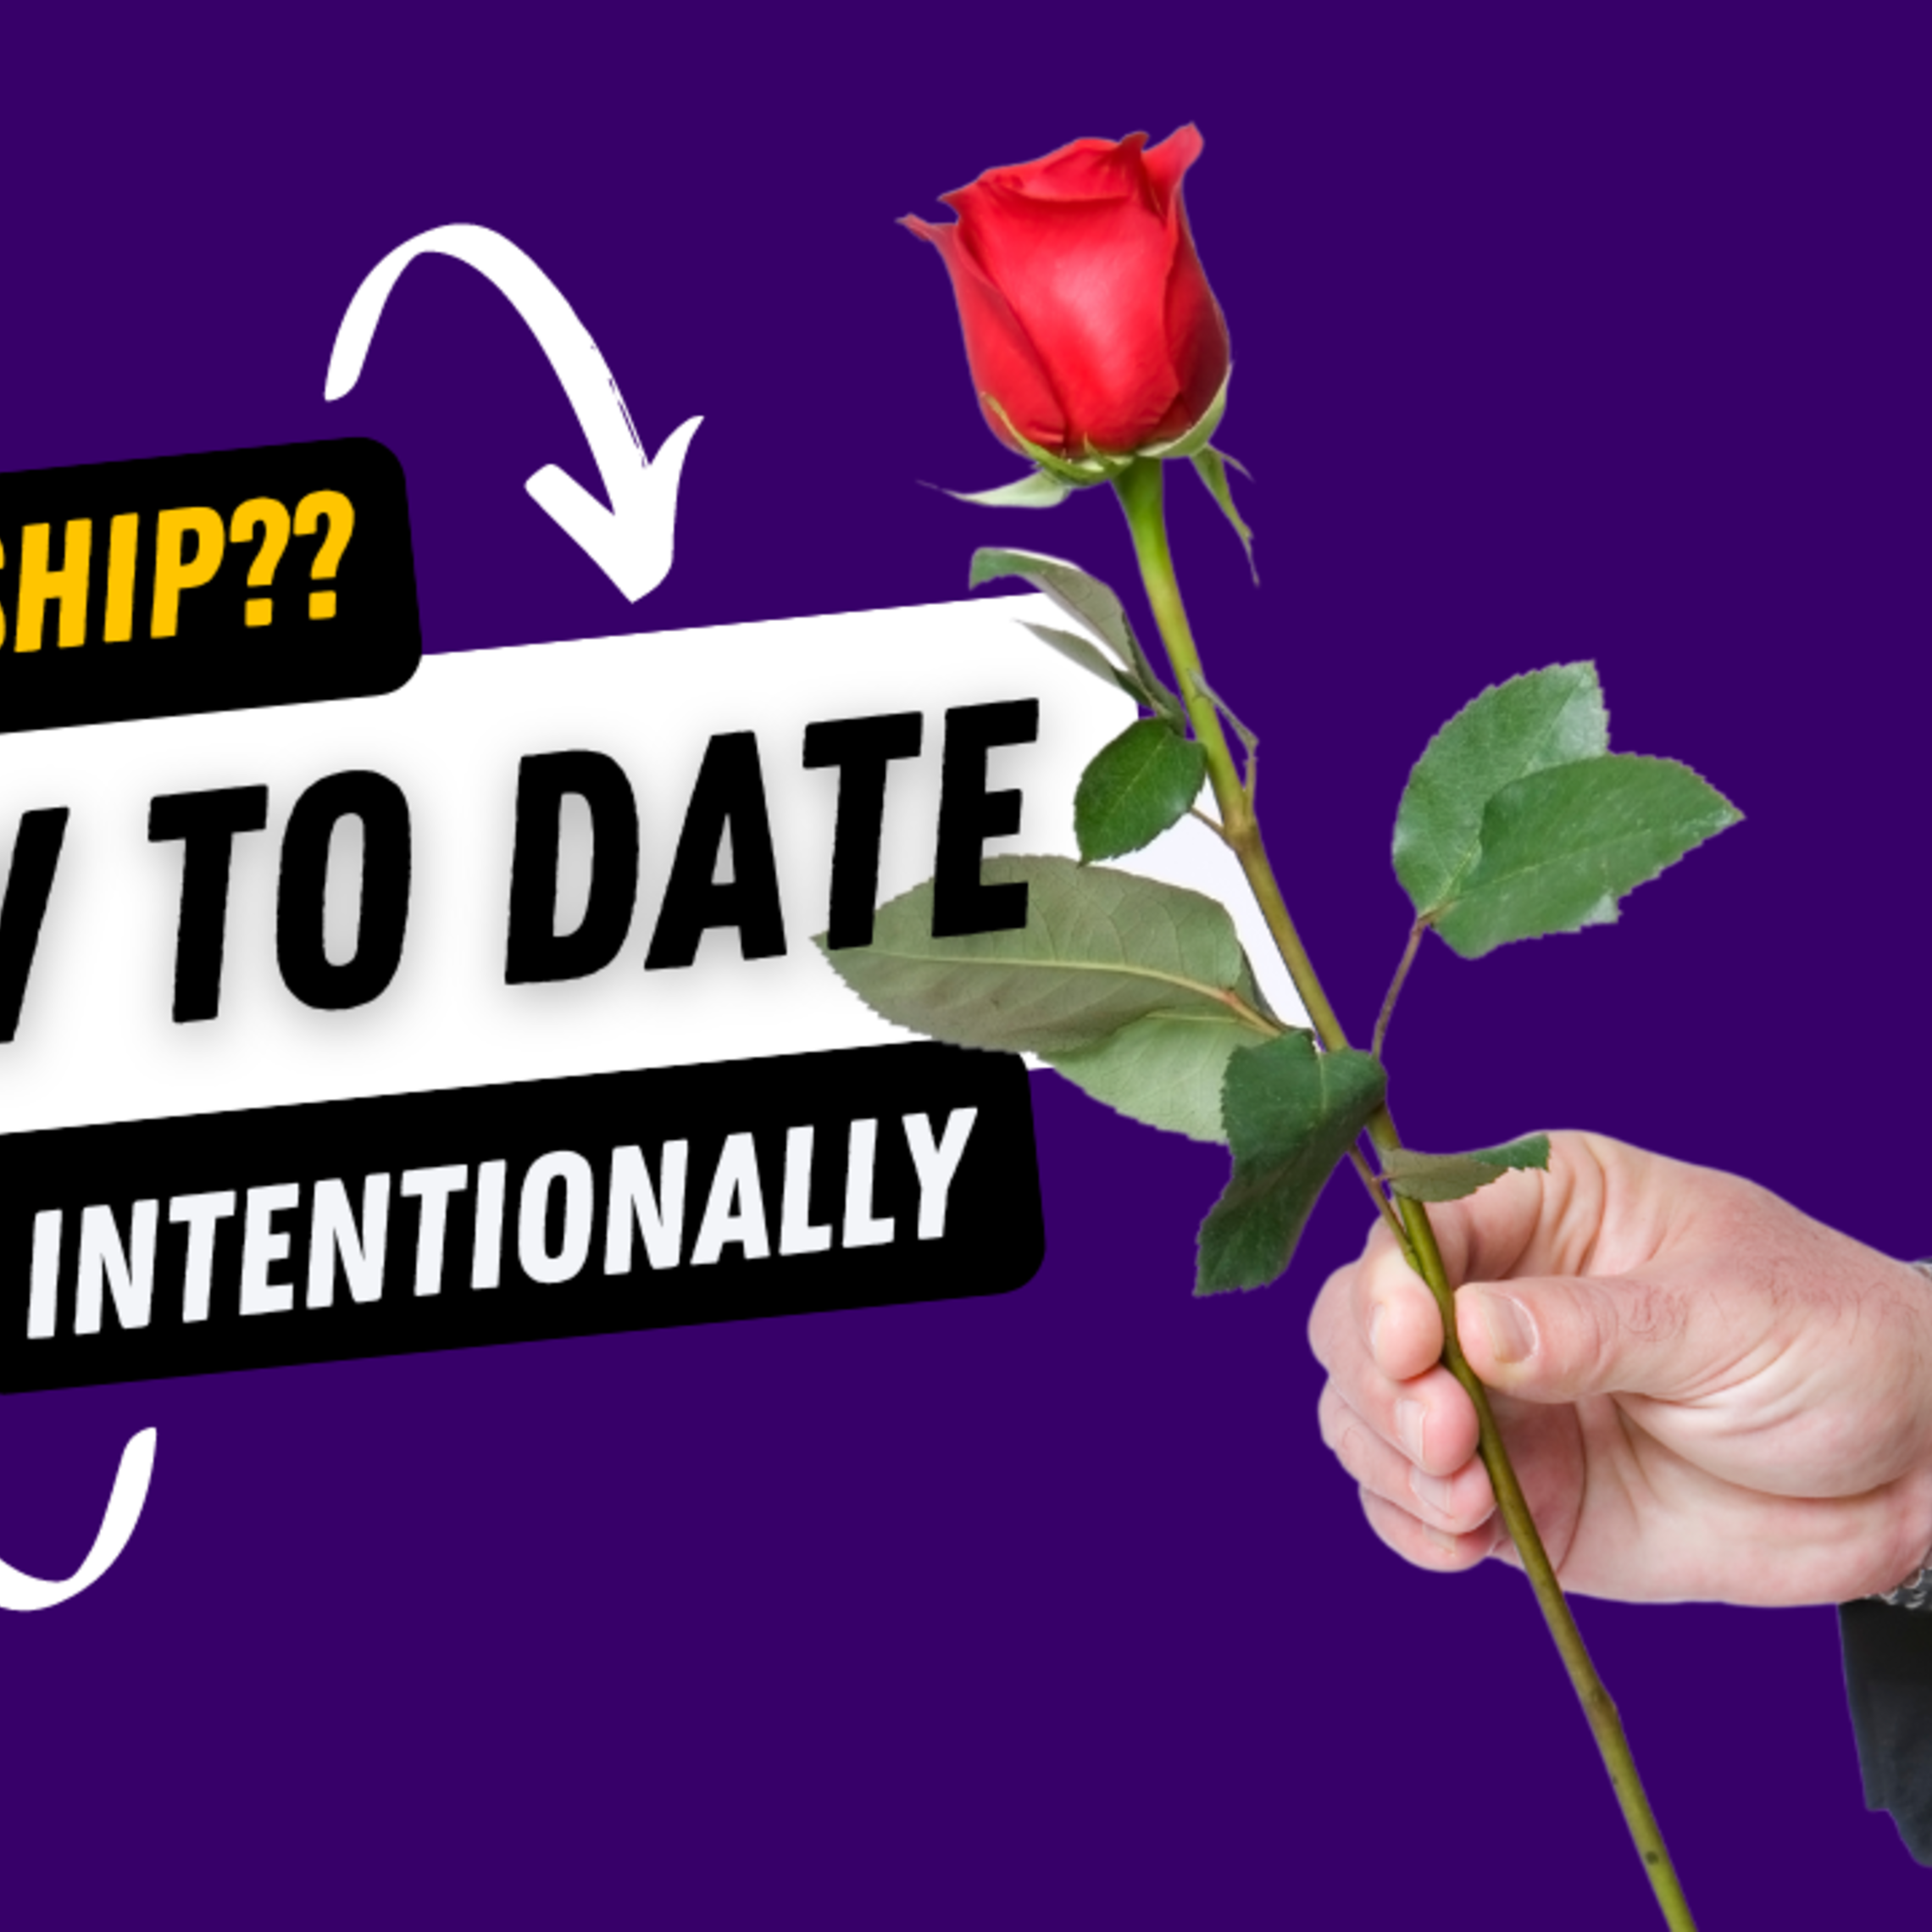 Call to Courtship? How to Date Intentionally